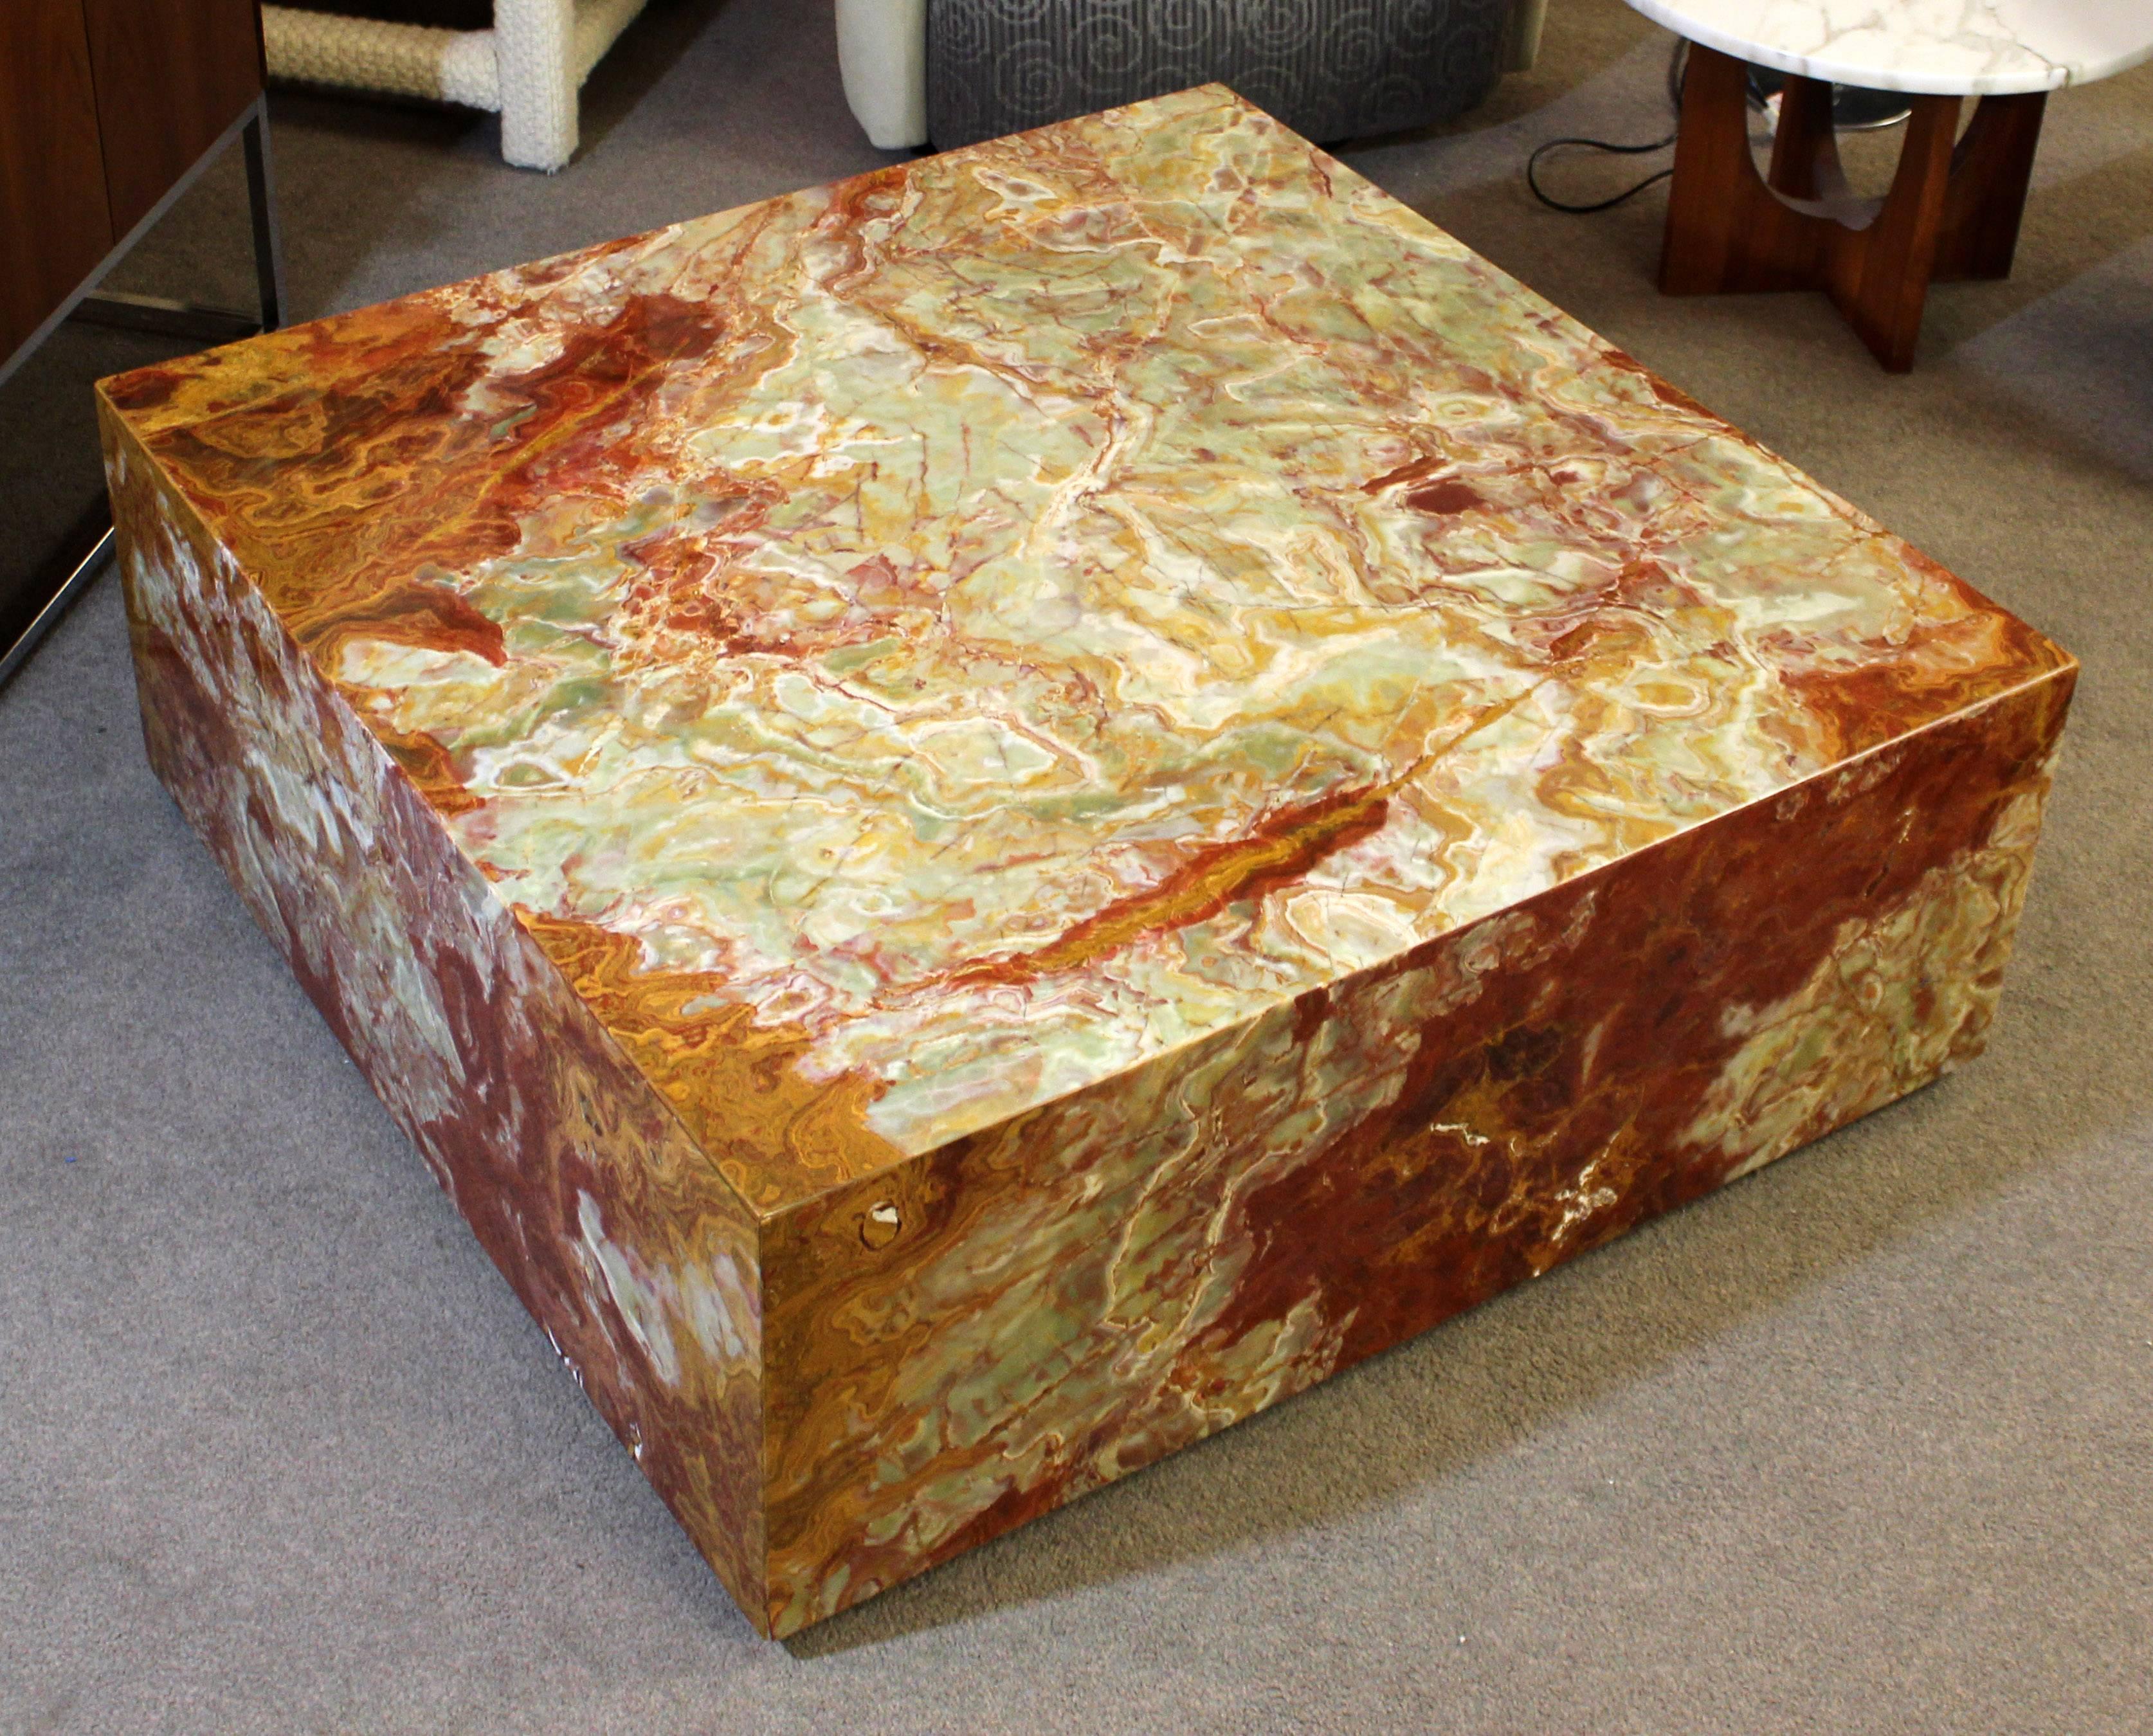 
For your consideration is a remarkably exquisite, square, marble/onyx coffee table, on wheels. The marble/onyx table is exceptional and the color scheme is breathtaking!! In excellent condition. The dimensions are 42" Sq x 16" H.